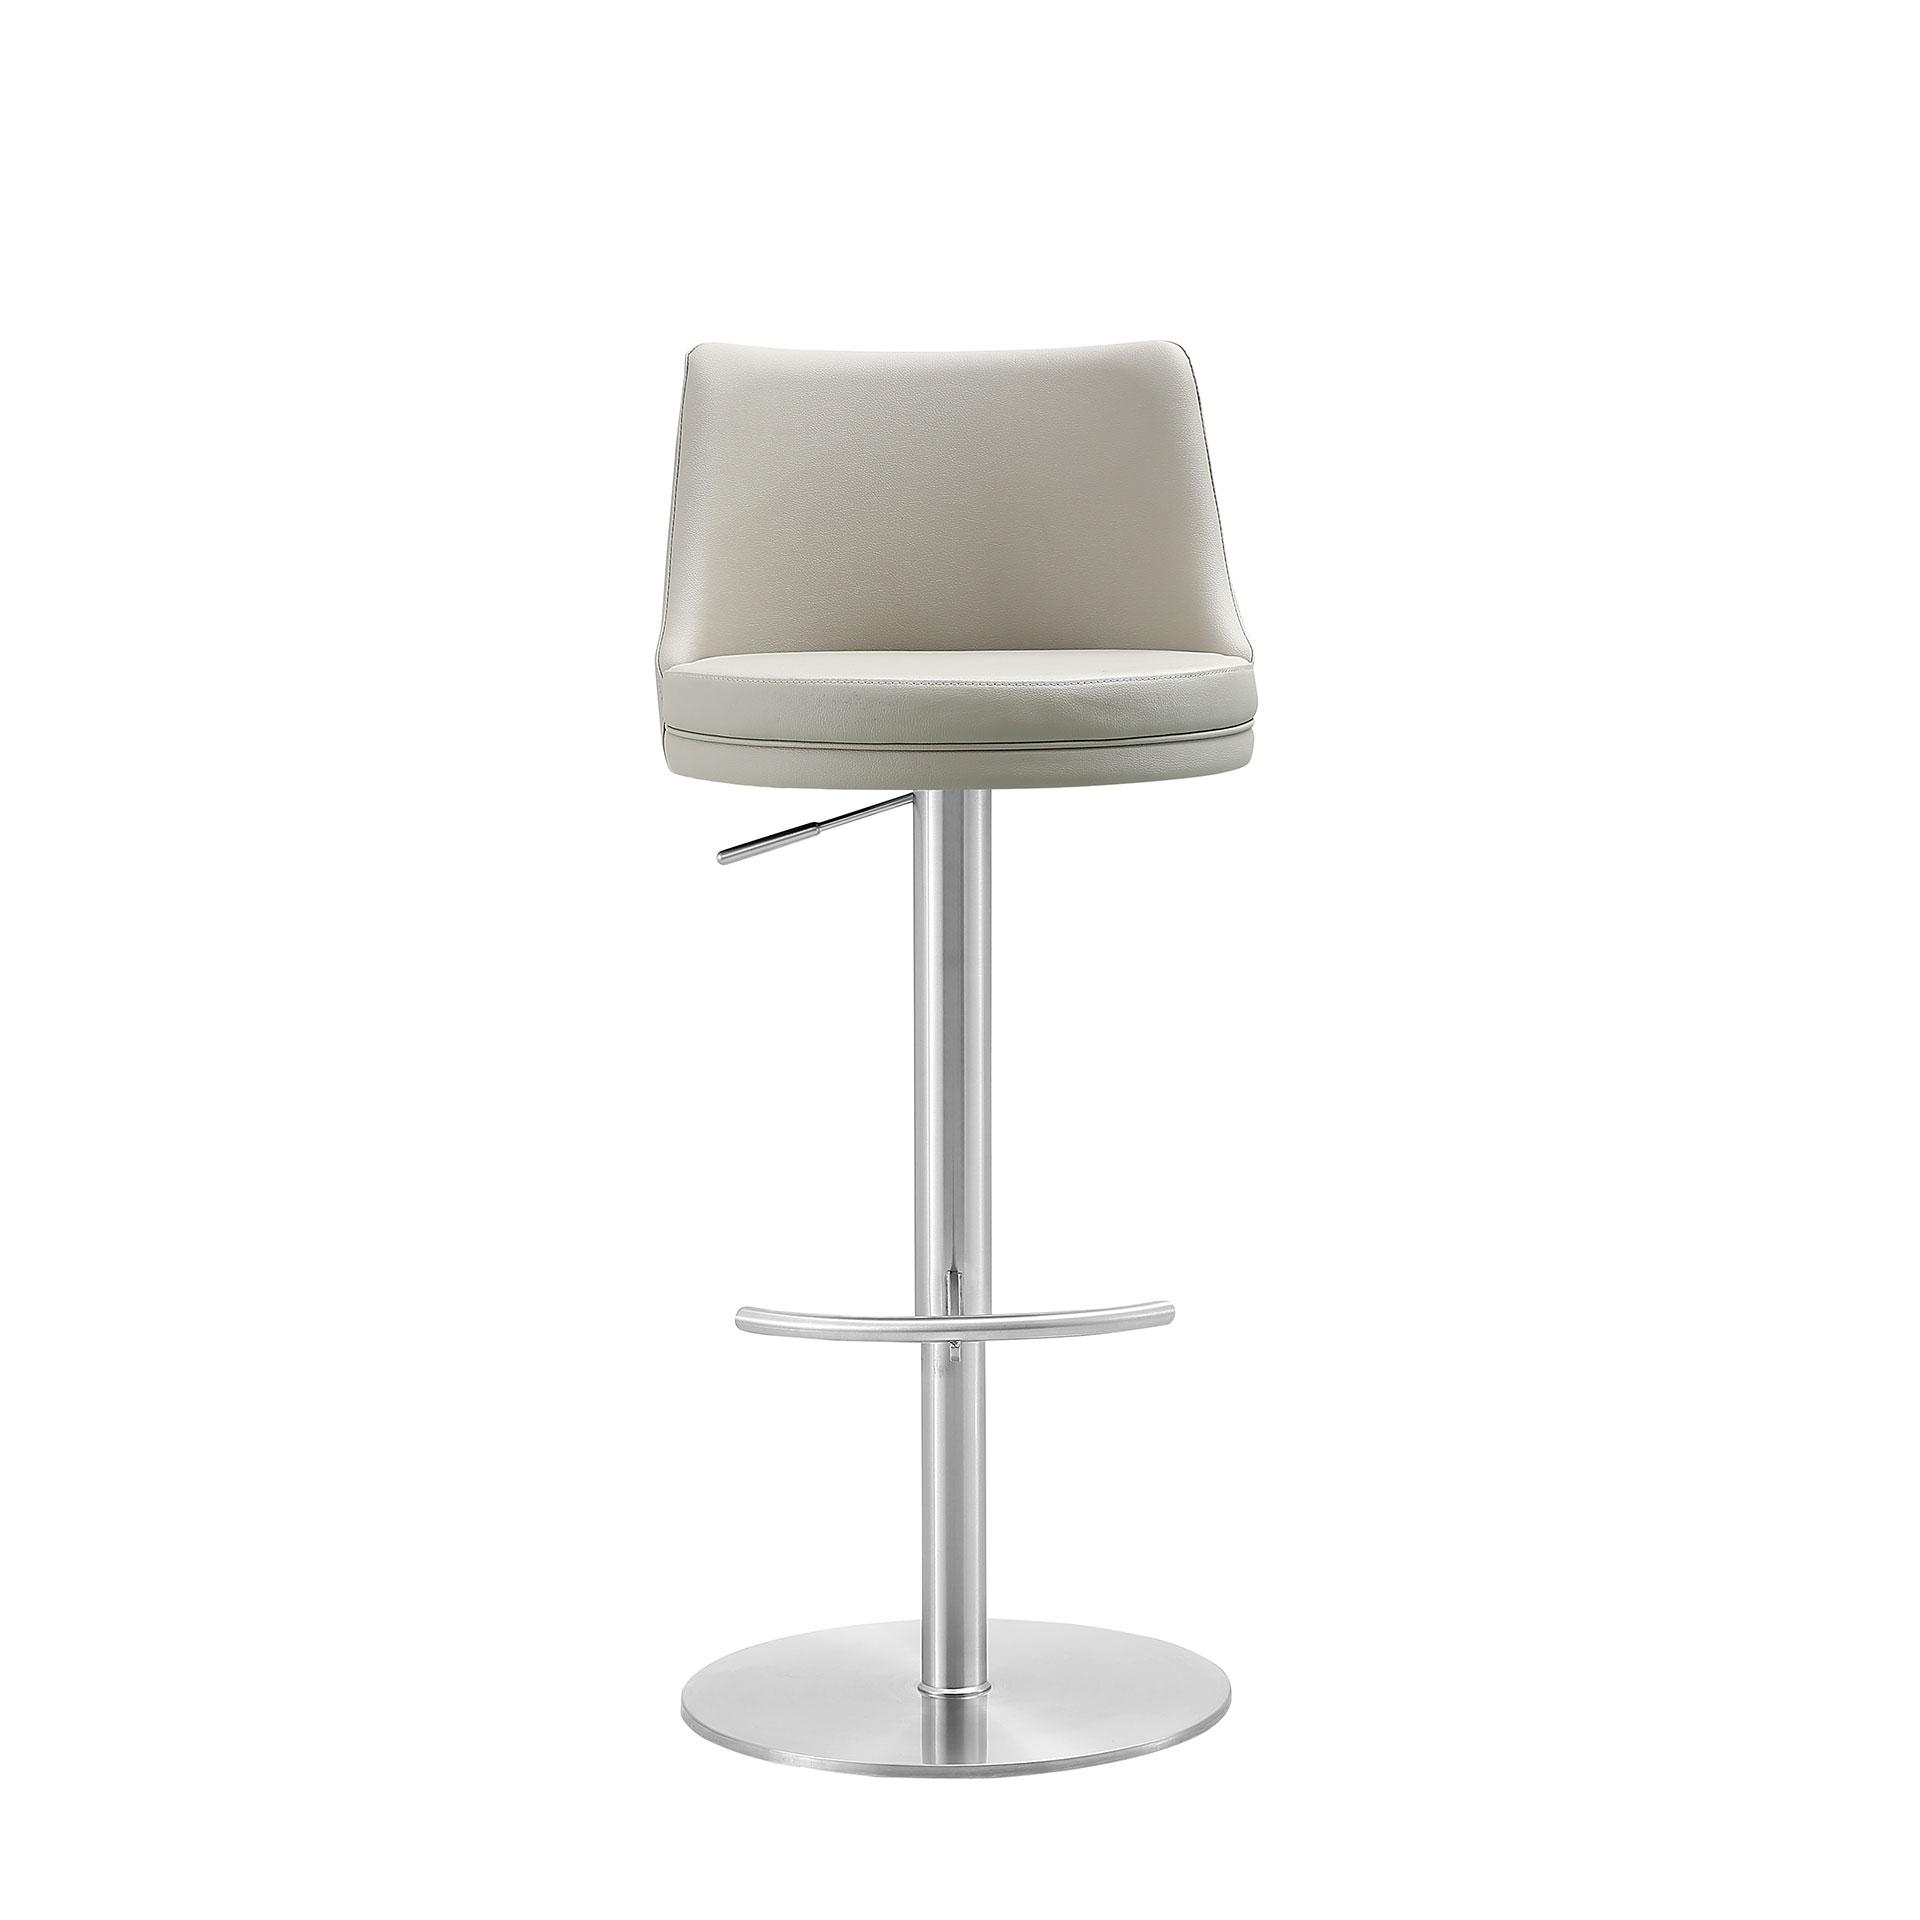 Modern Bar Stool BS1715P-SLV/LGRY Carter BS1715P-SLV/LGRY in Light Gray Faux Leather